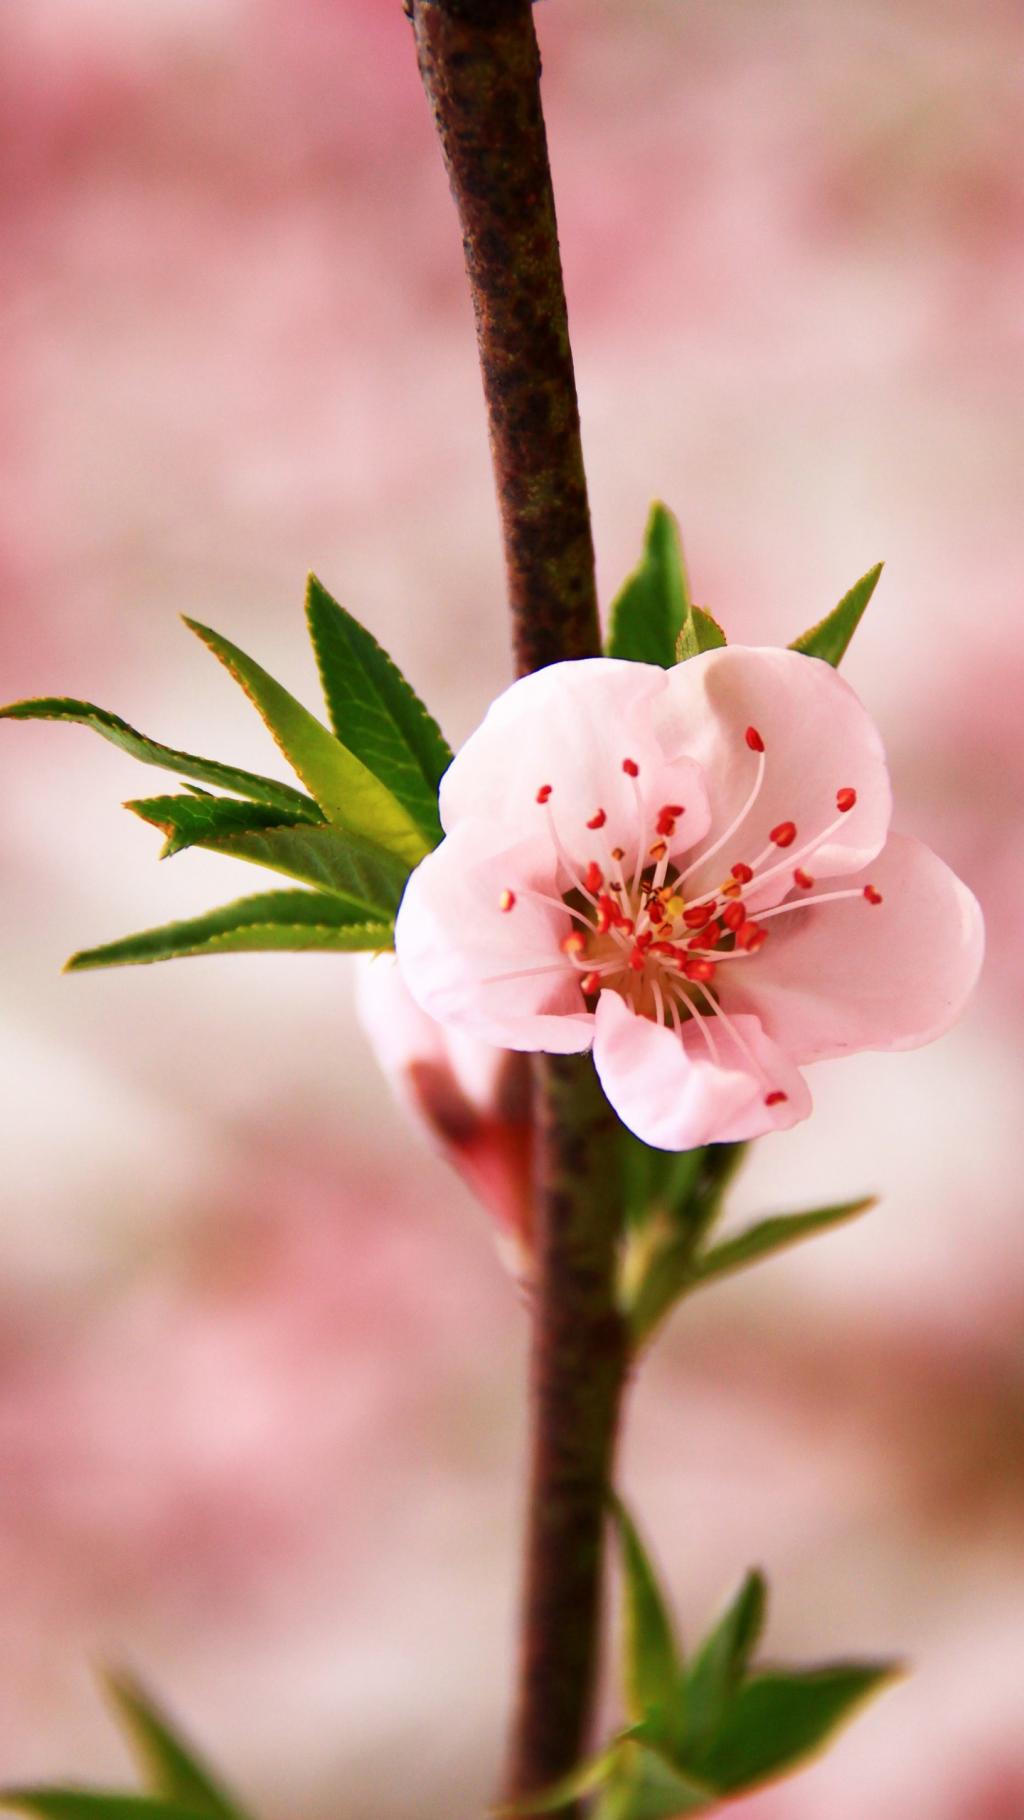 Red and white peach blossoms